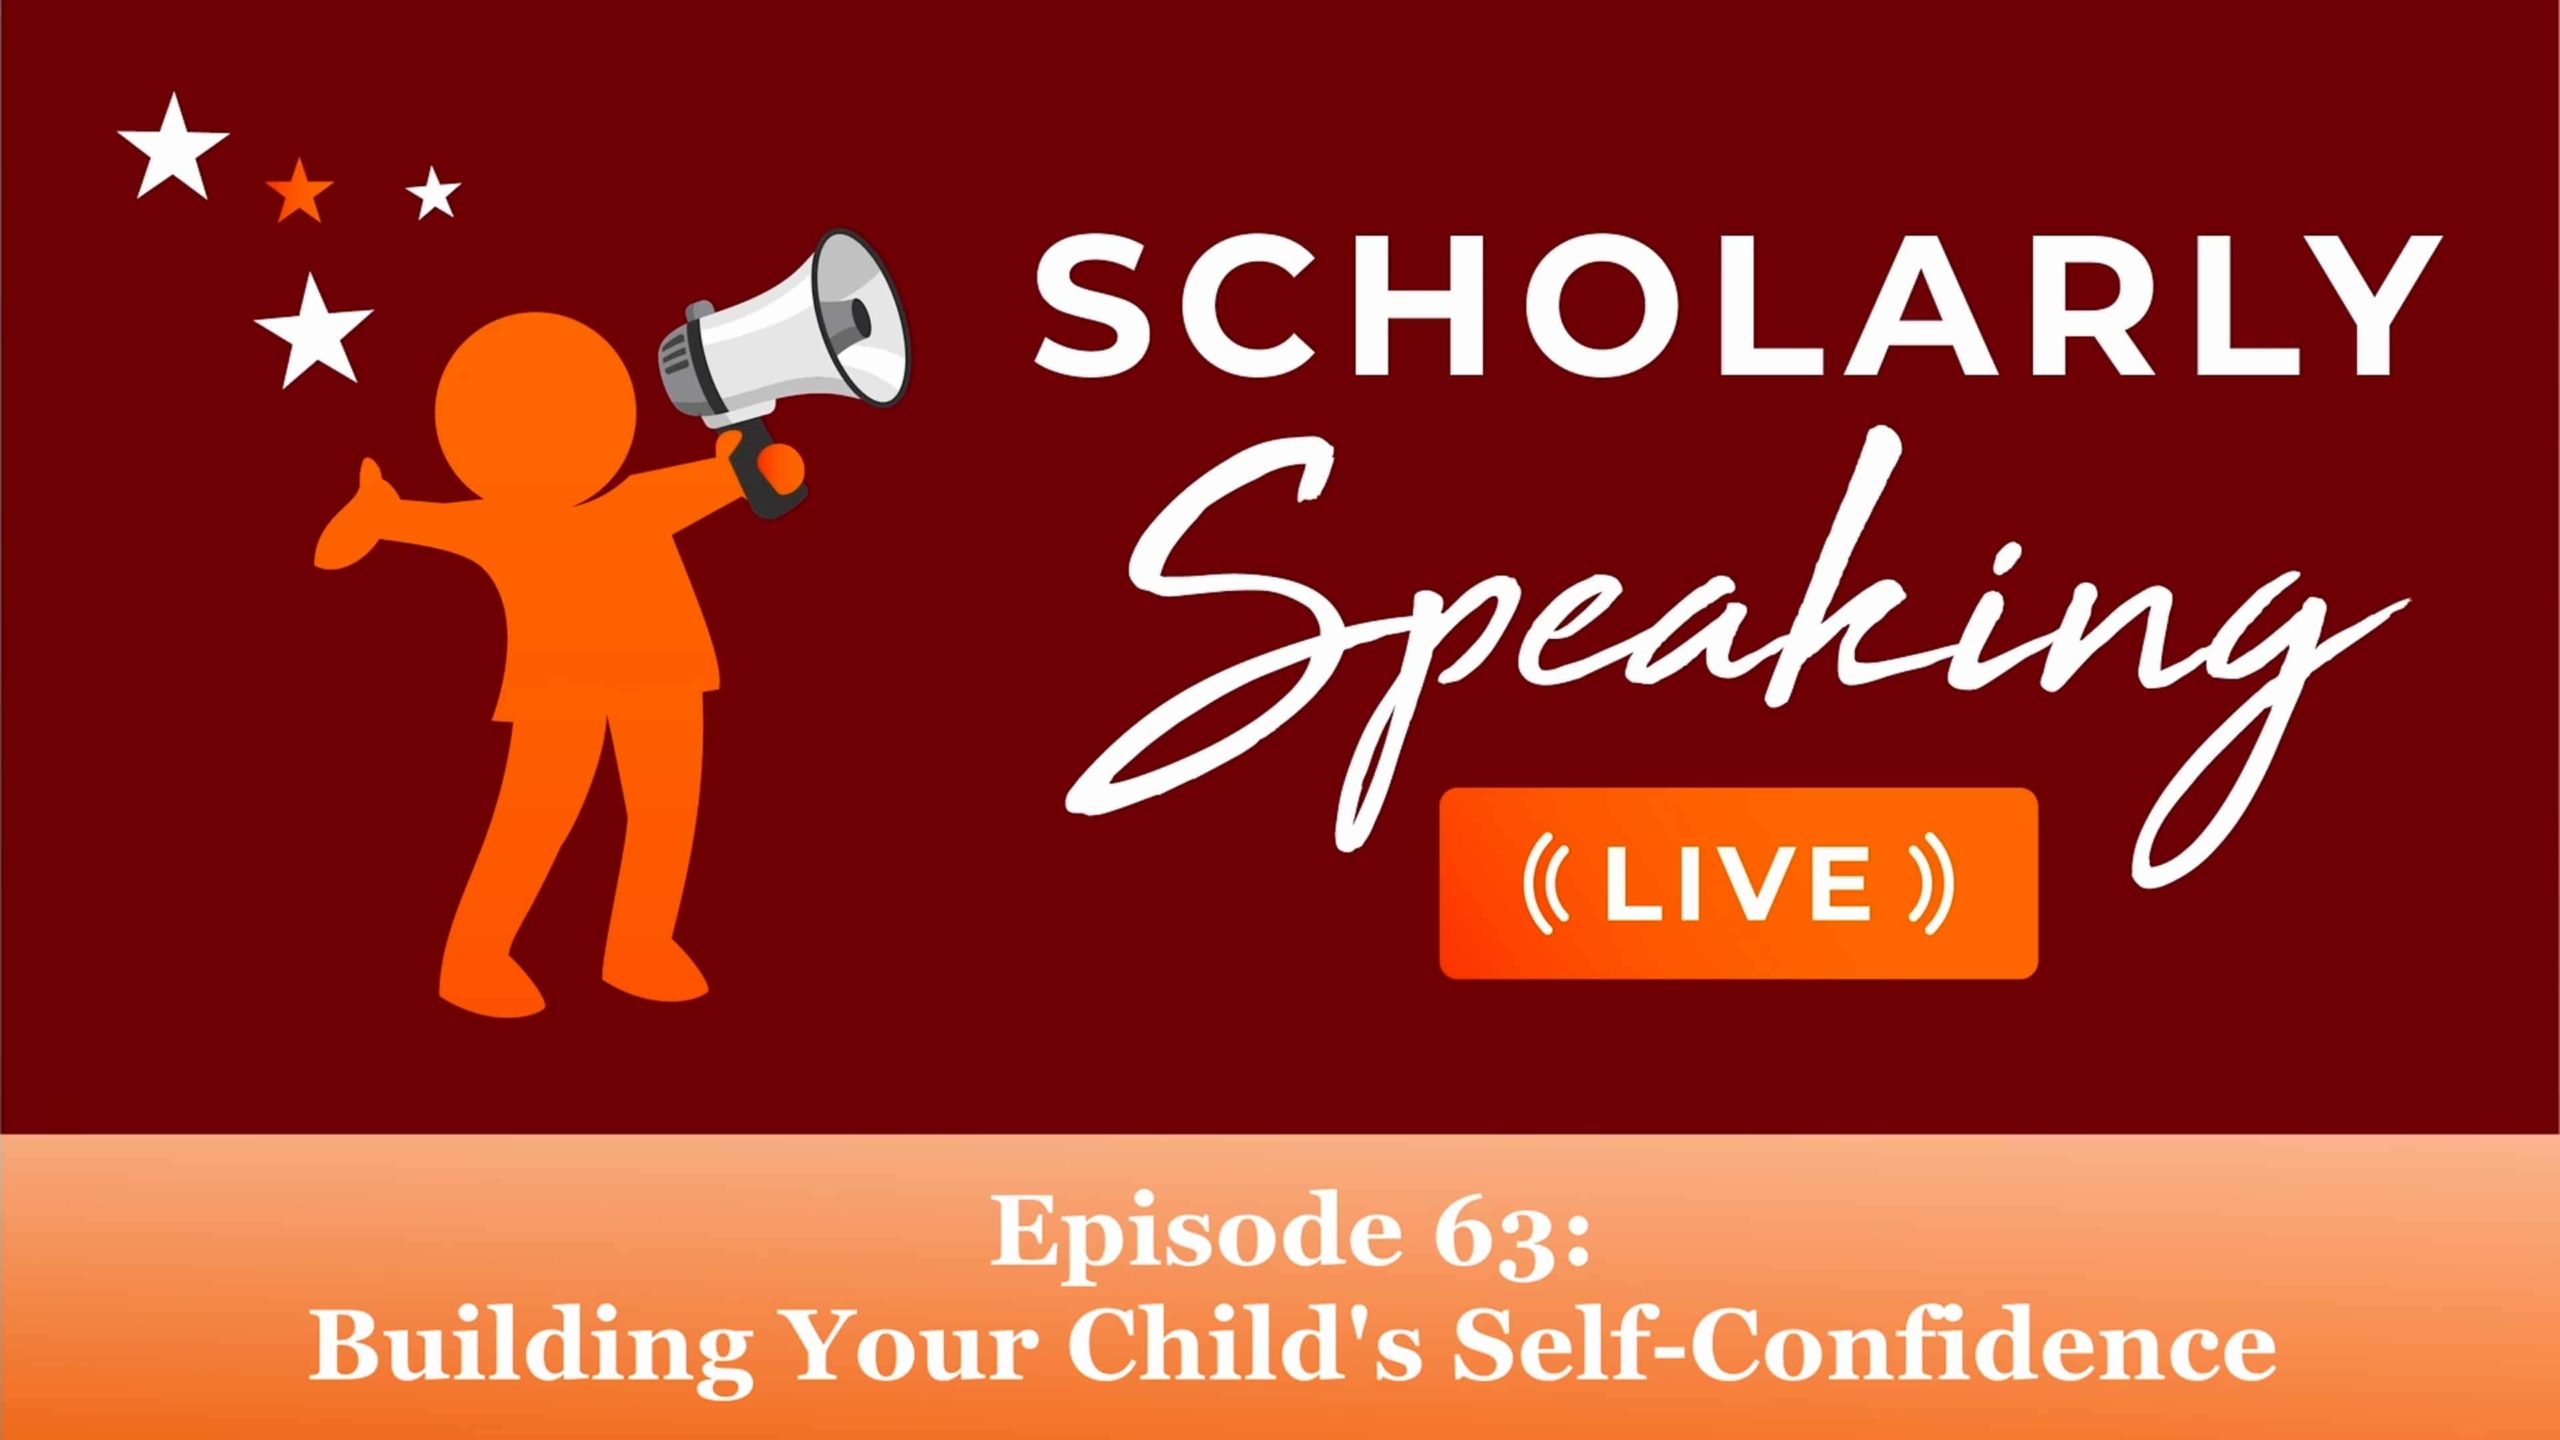 Episode 63: Building Your Child's Self-Confidence